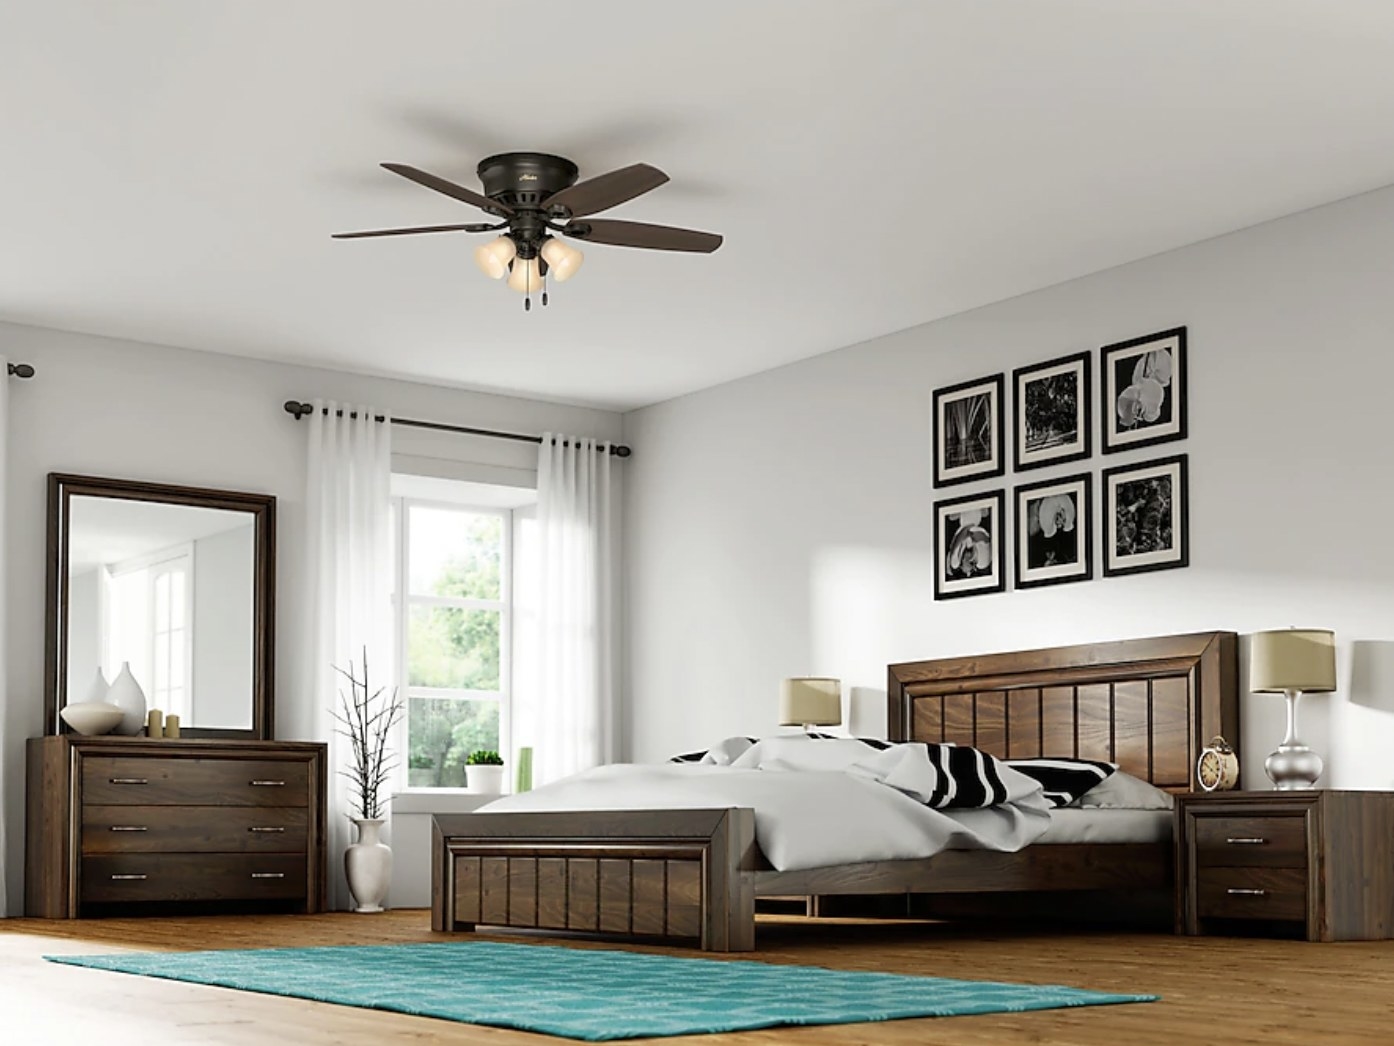 the brown five-blade ceiling fan with three lights hanging above bed